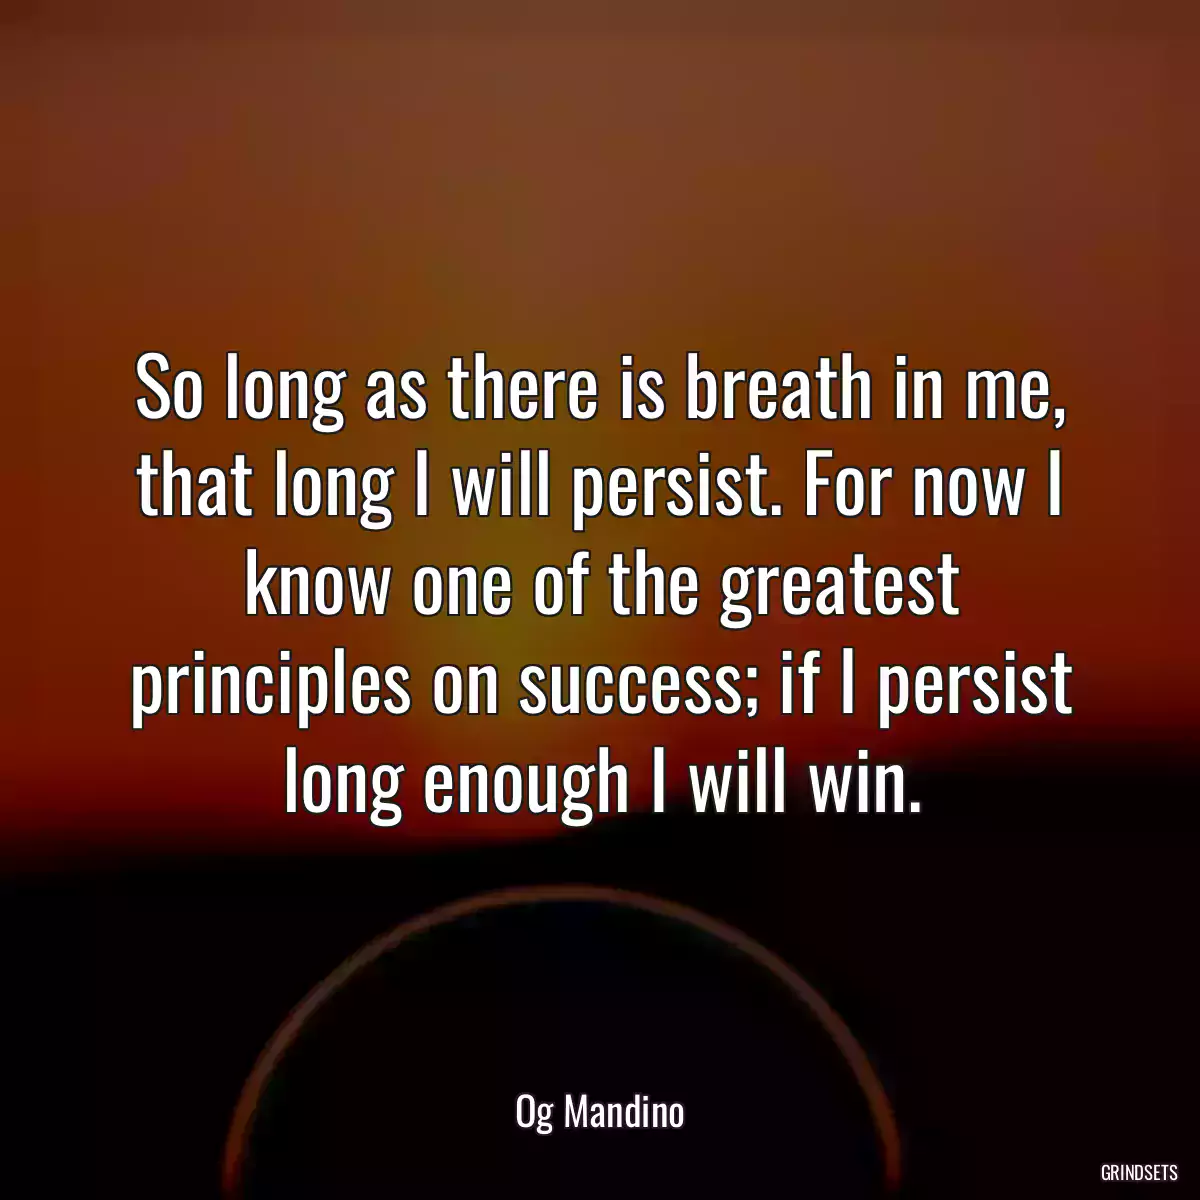 So long as there is breath in me, that long I will persist. For now I know one of the greatest principles on success; if I persist long enough I will win.